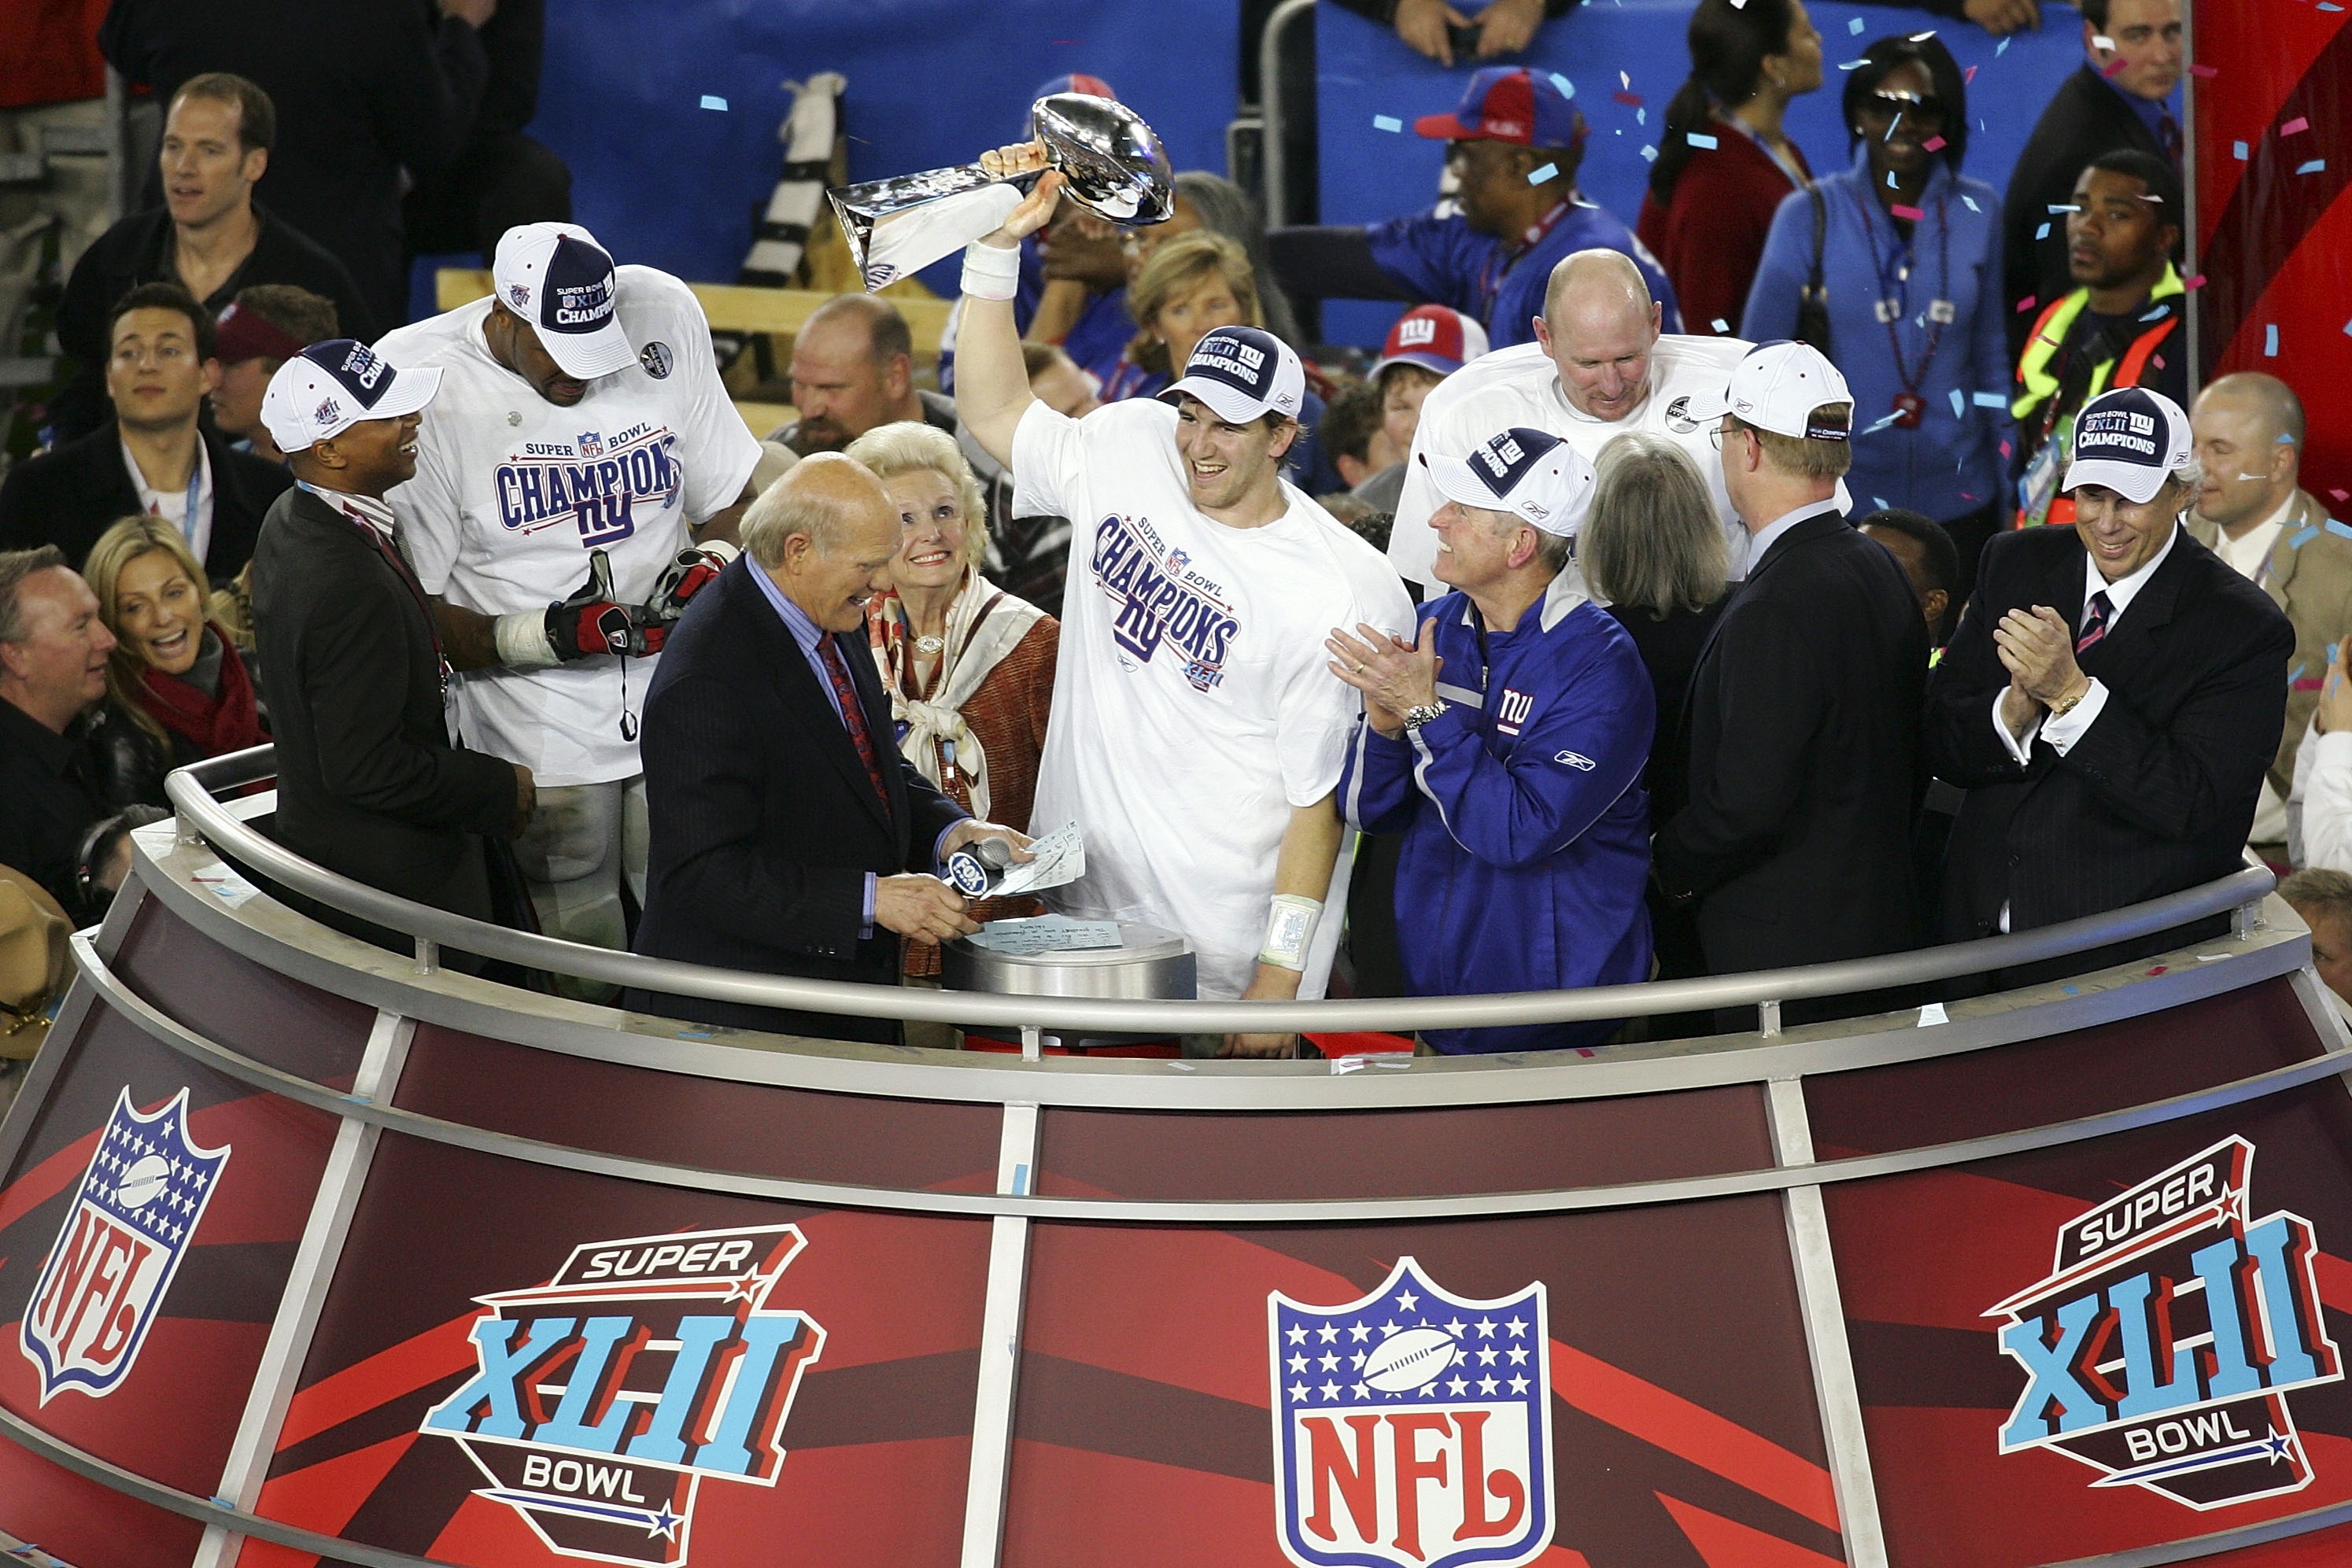 New York Giants Super Bowl History: Wins, Losses, Appearances and